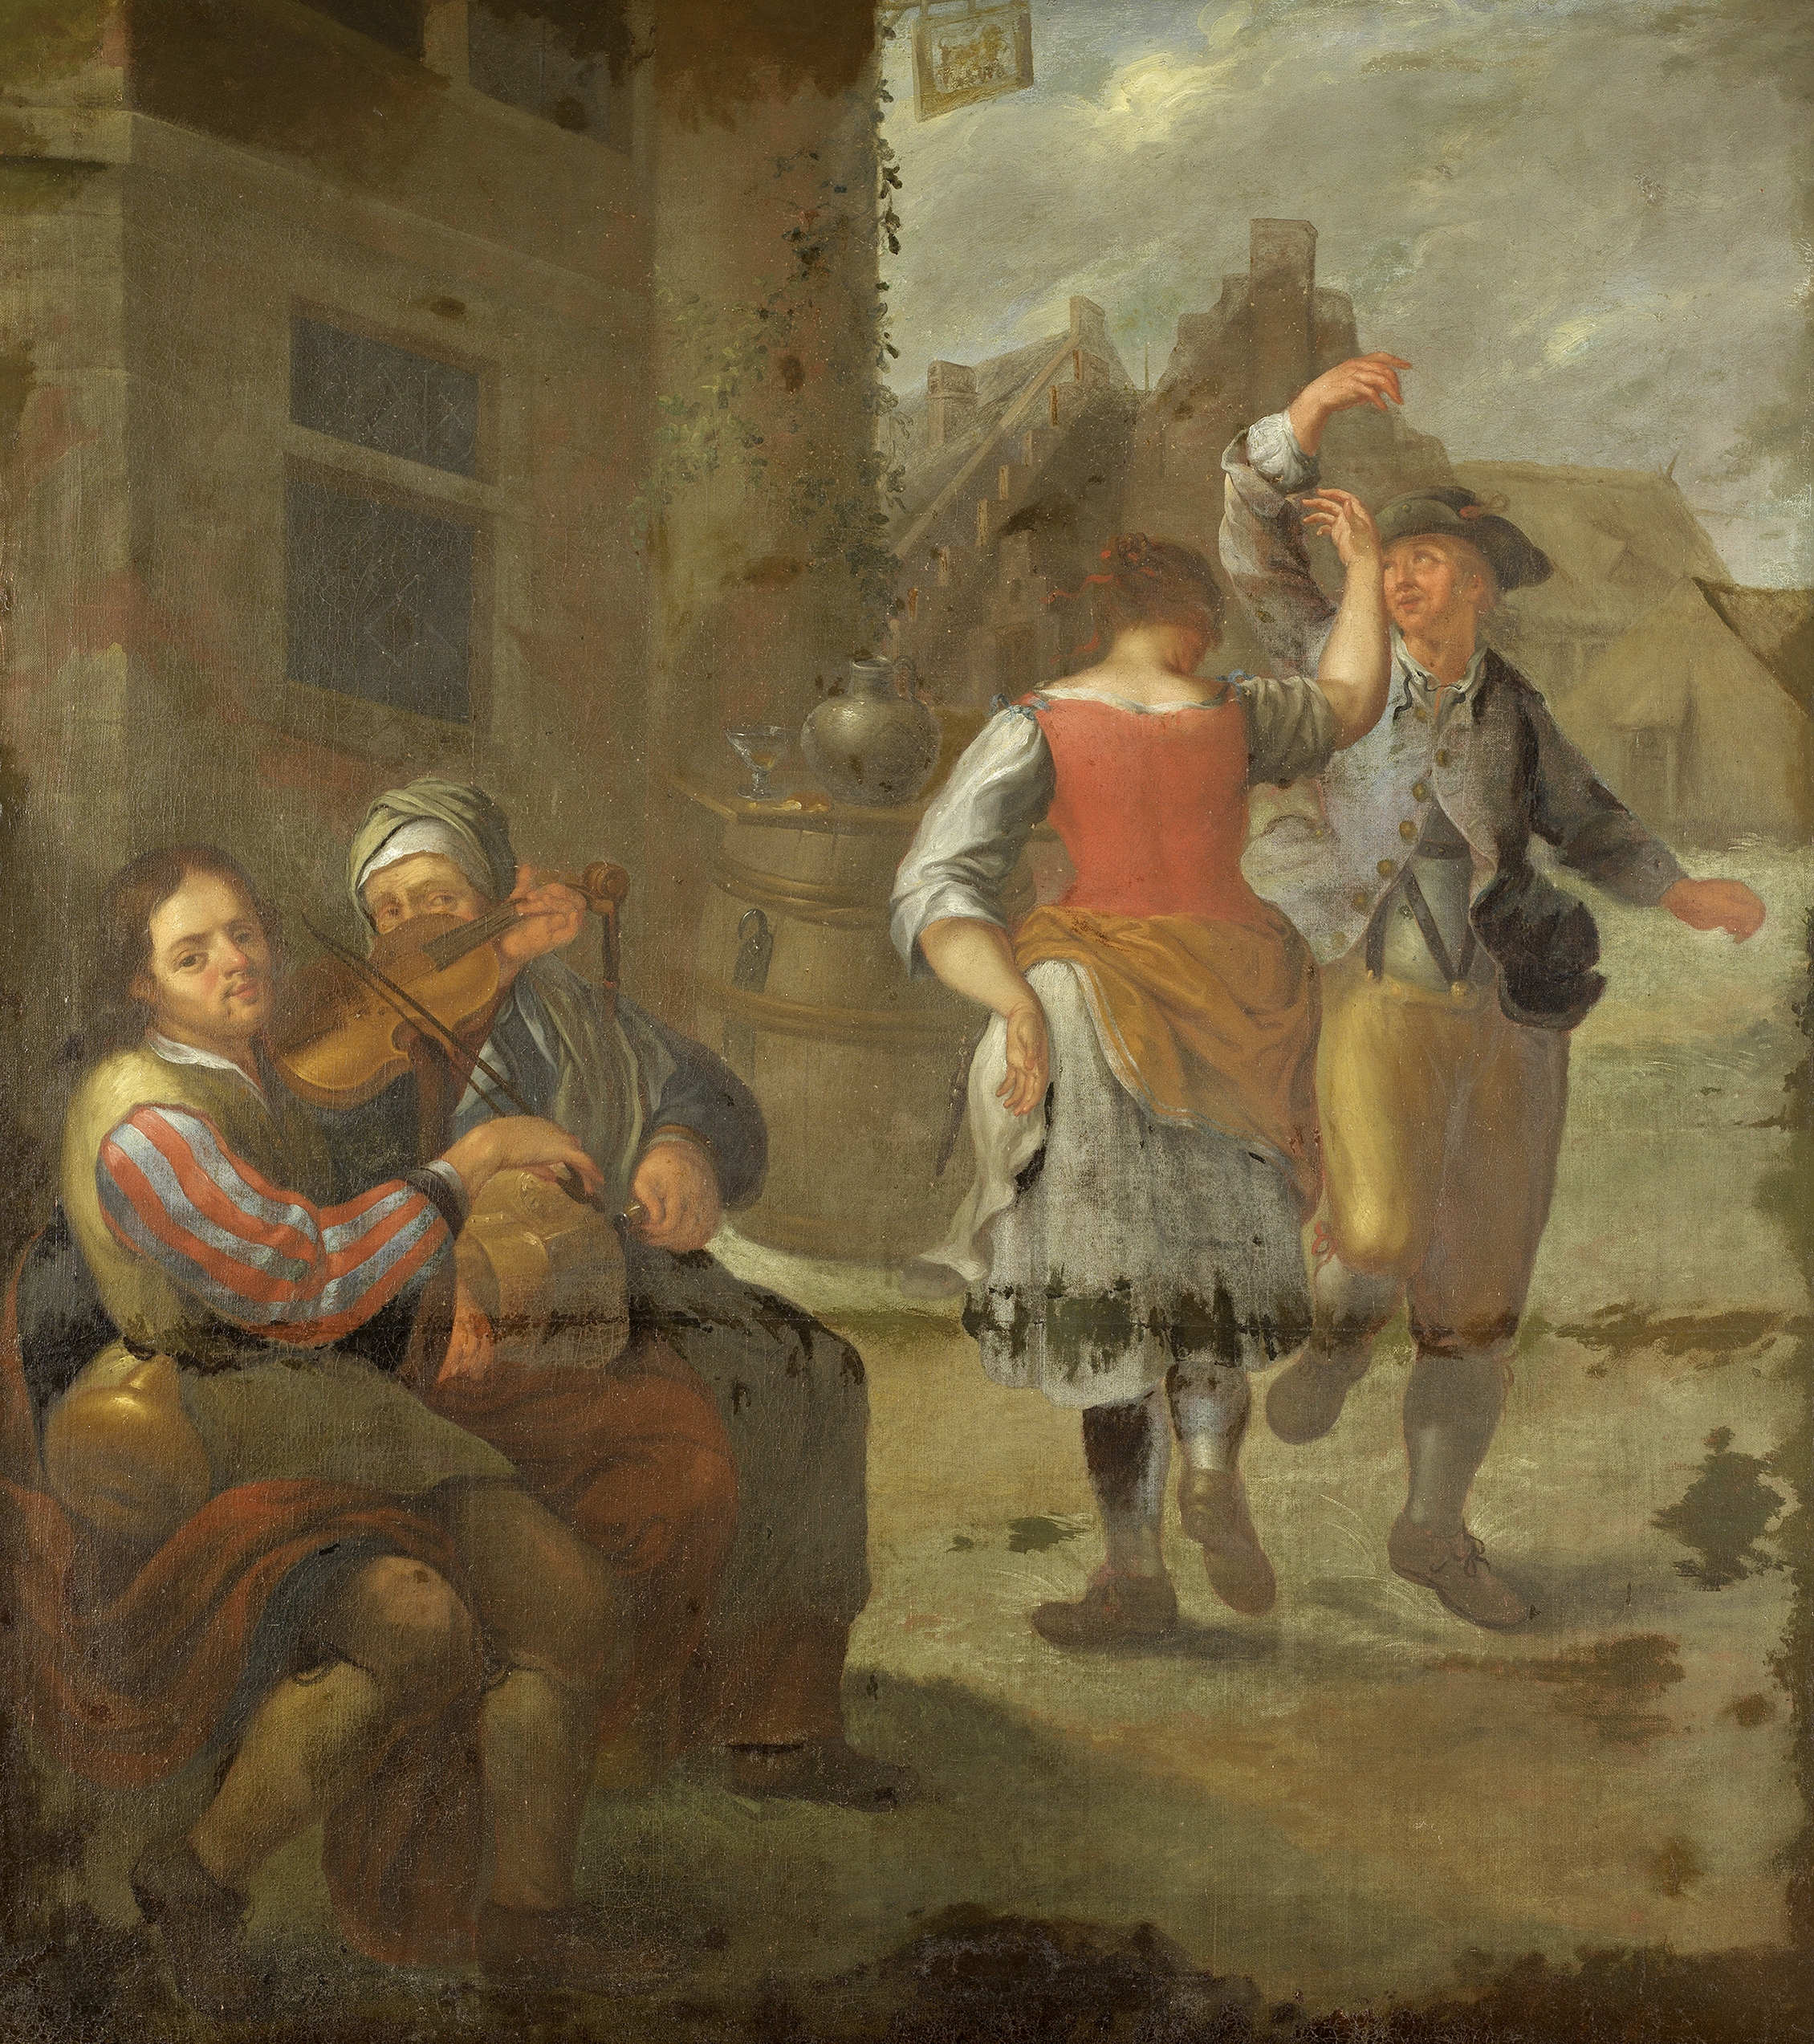 Flemish School, 18th Century Figures dancing and merrymaking before an inn